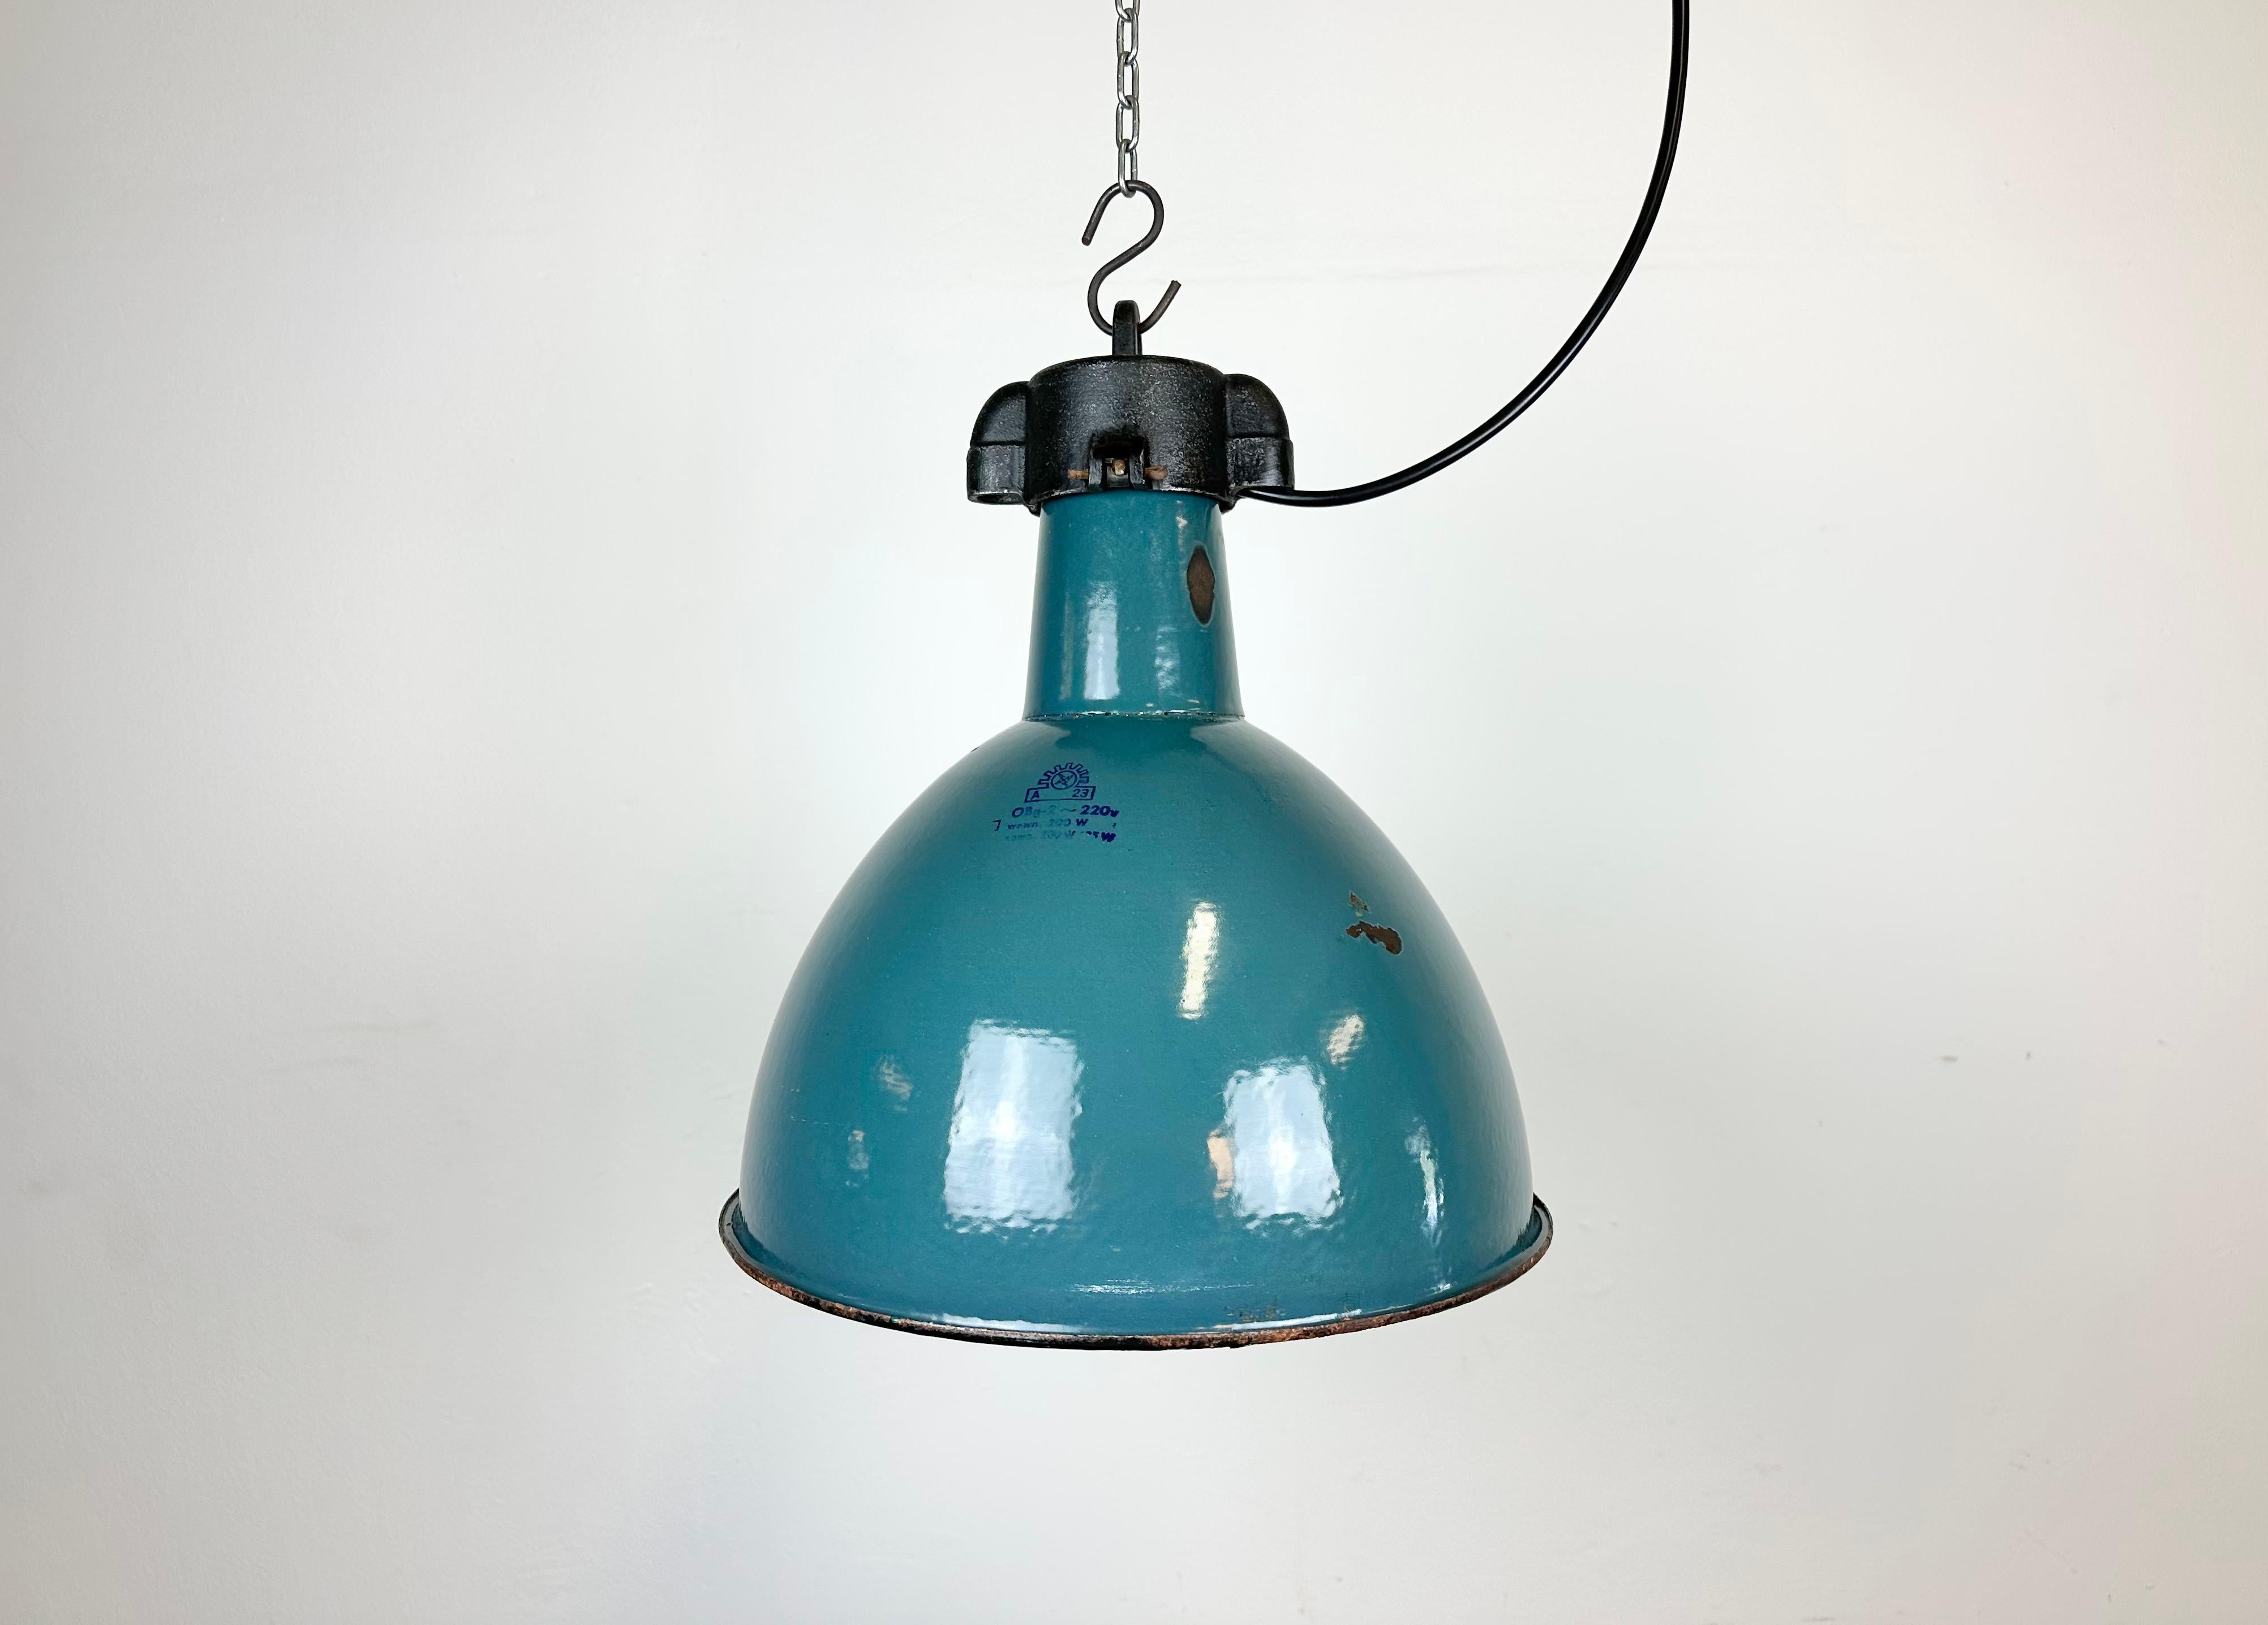 Industrial green enamel pendant light made by Polam Wilkasy in Poland during the 1960s. White enamel inside the shade. Cast iron top. The porcelain socket requires E 27/ E 26 light bulbs. New wire. Fully functional. The weight of the lamp is 2,3 kg.